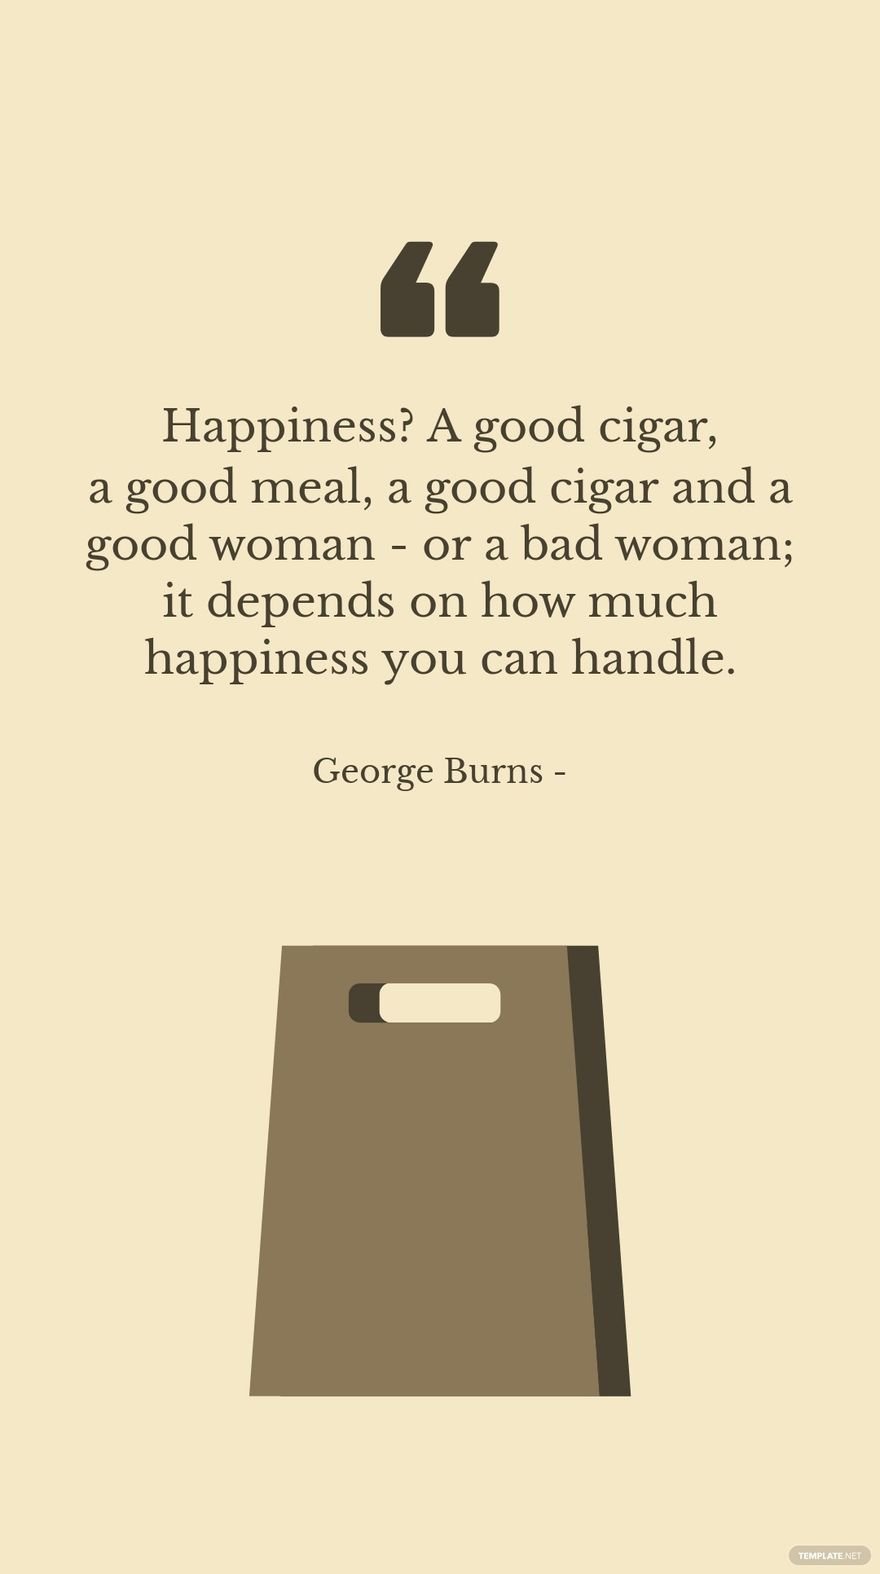 George Burns - Happiness? A good cigar, a good meal, a good cigar and a good woman - or a bad woman; it depends on how much happiness you can handle.